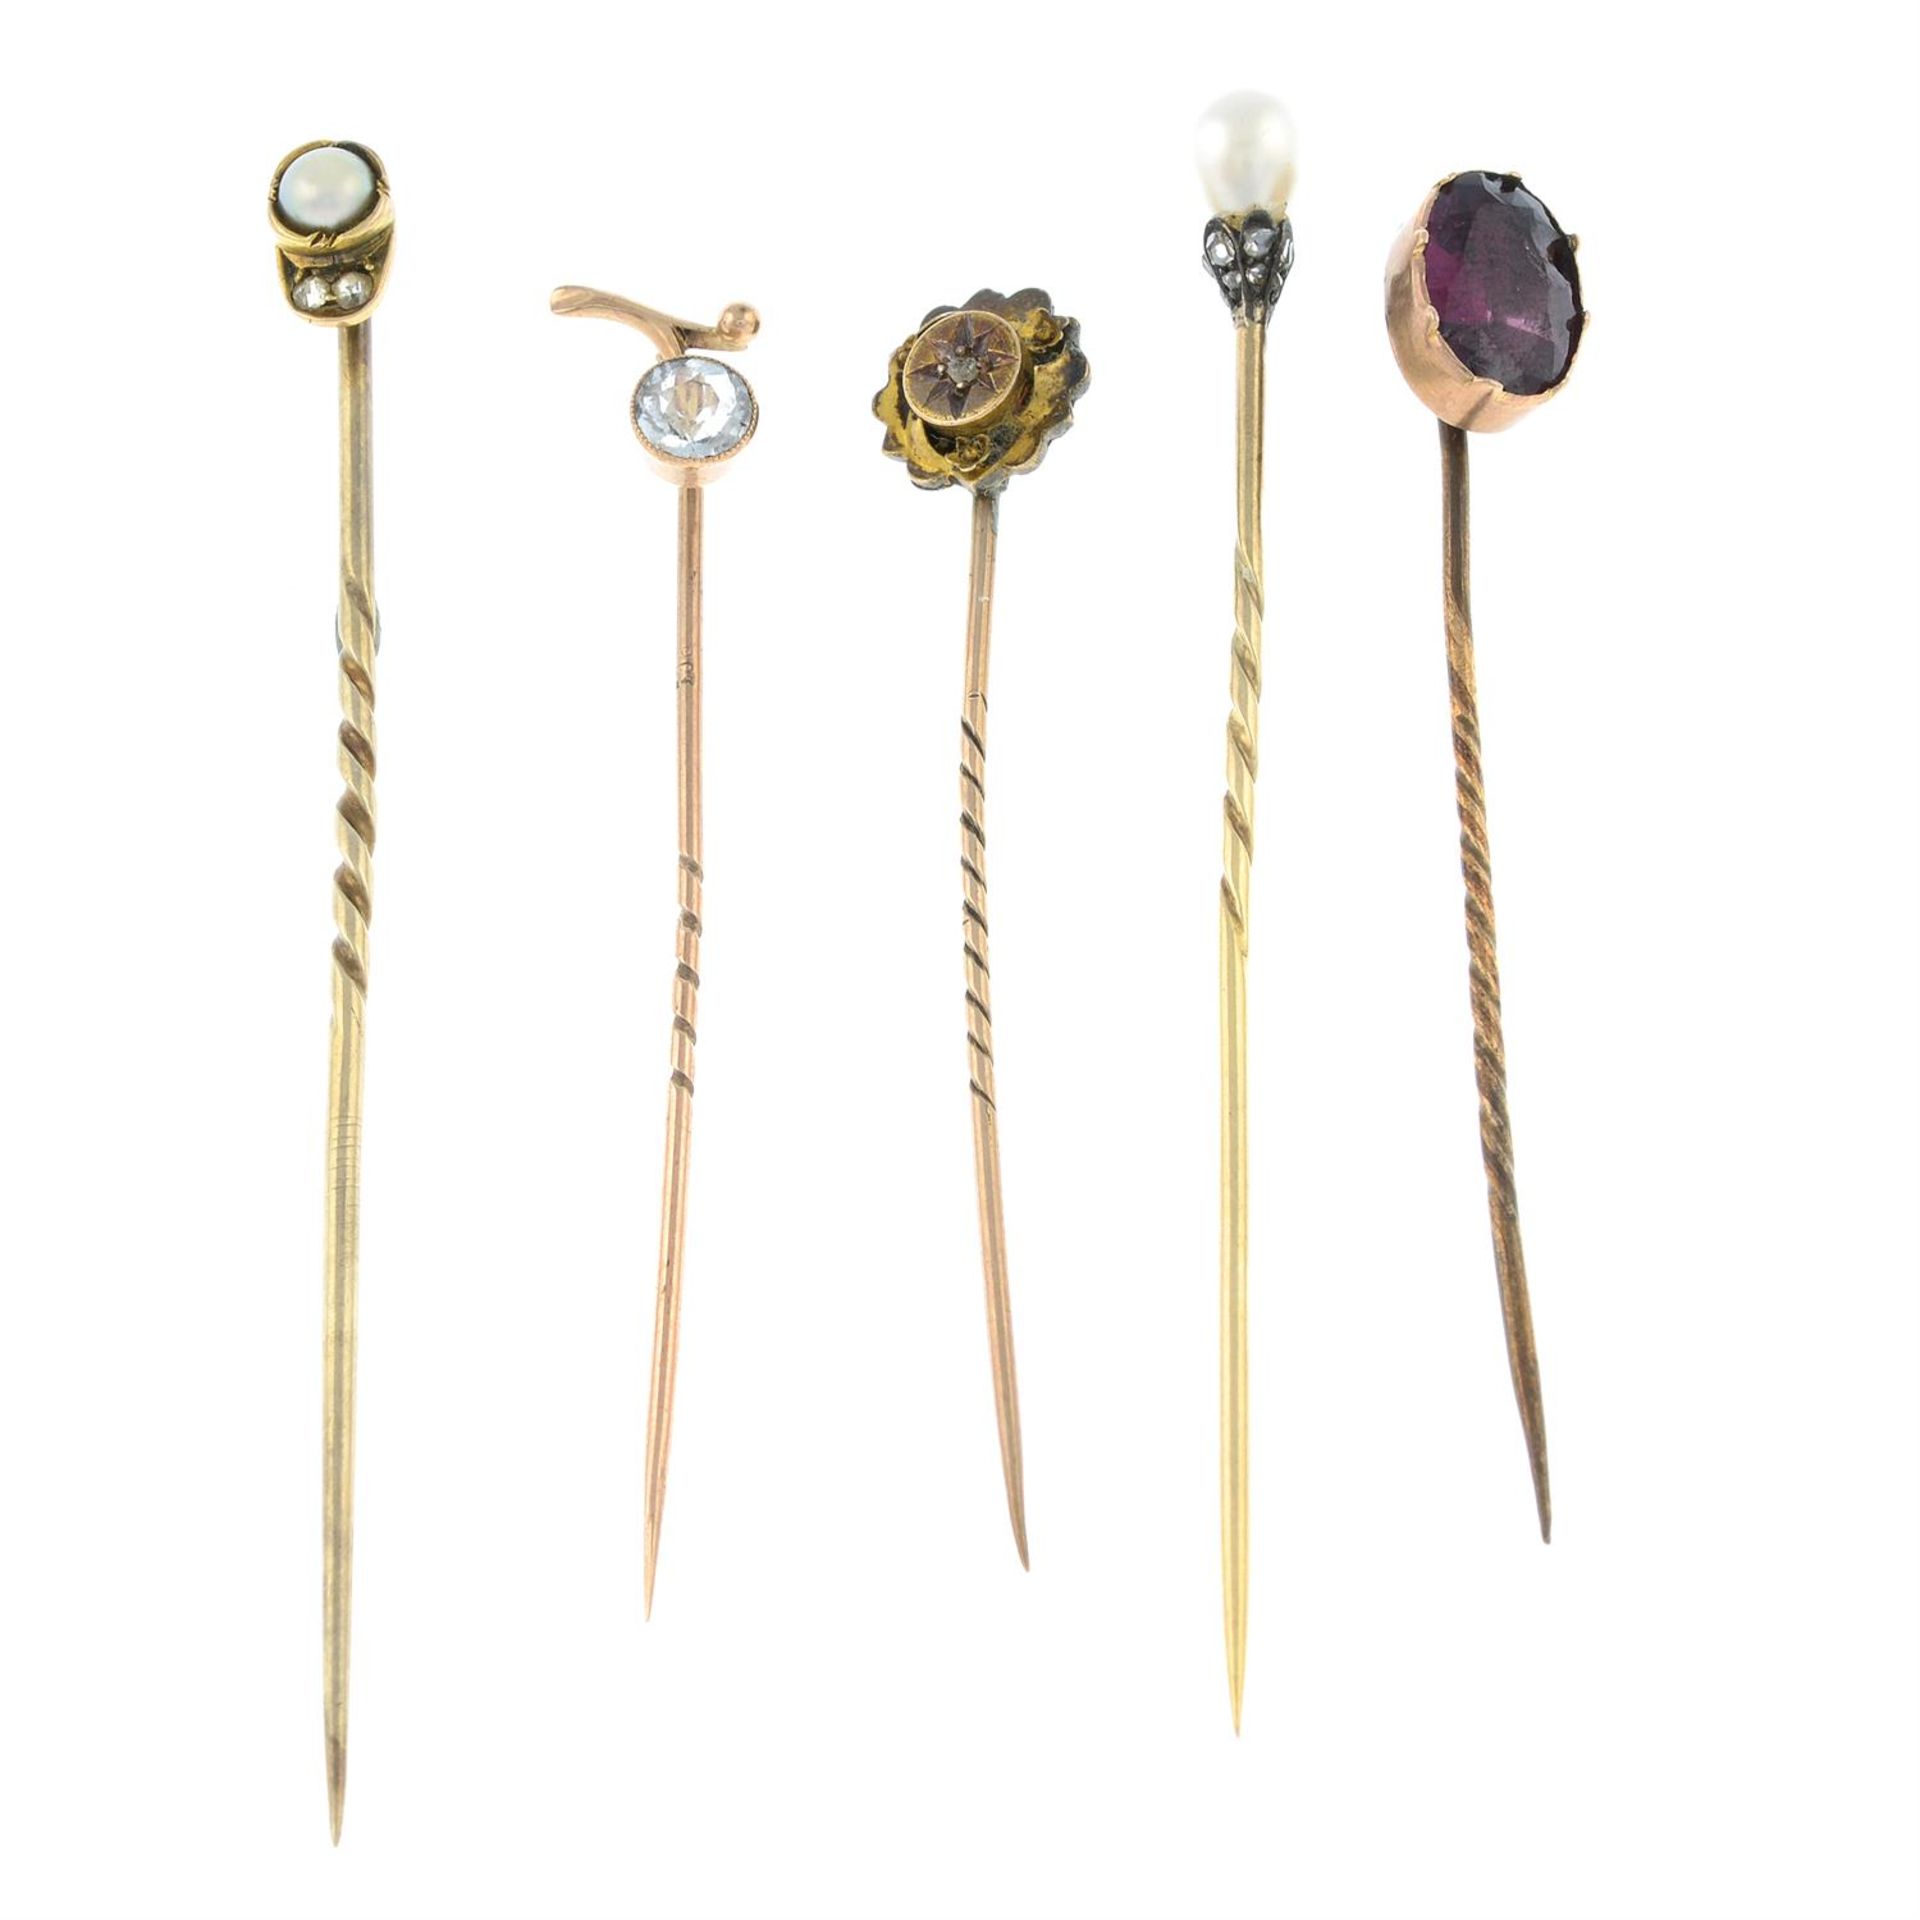 A selection of late Victorian to early 20th century gold gem-set stickpins.